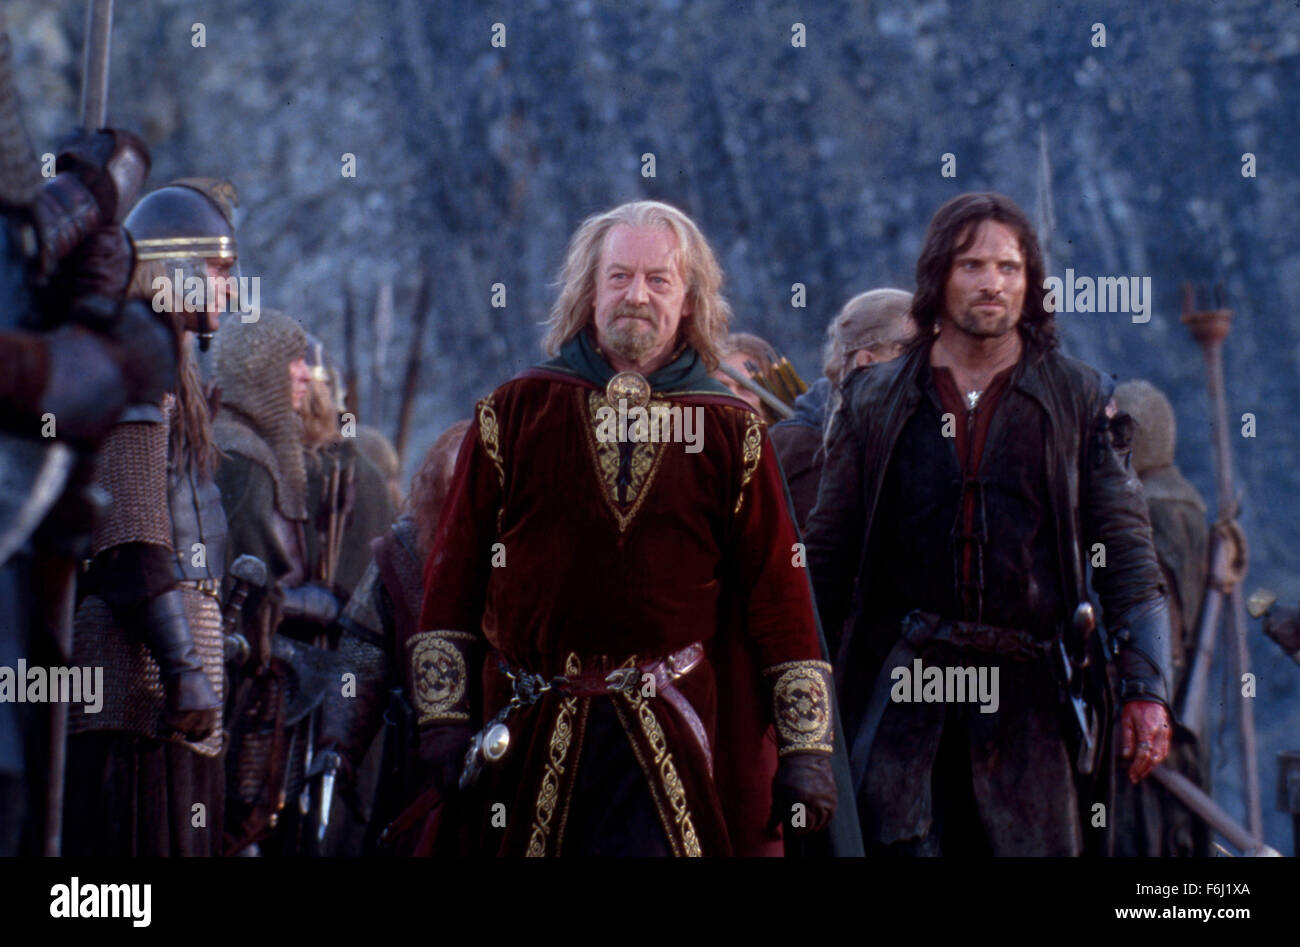 Nov 05, 2002; Queenstown, New Zealand; BERNARD HILL and VIGGO MORTENSEN star as King Theoden and Aragon in the fantasy adventure 'The Lord of the Rings; The Two Towers' directed by Peter Jackson. Stock Photo